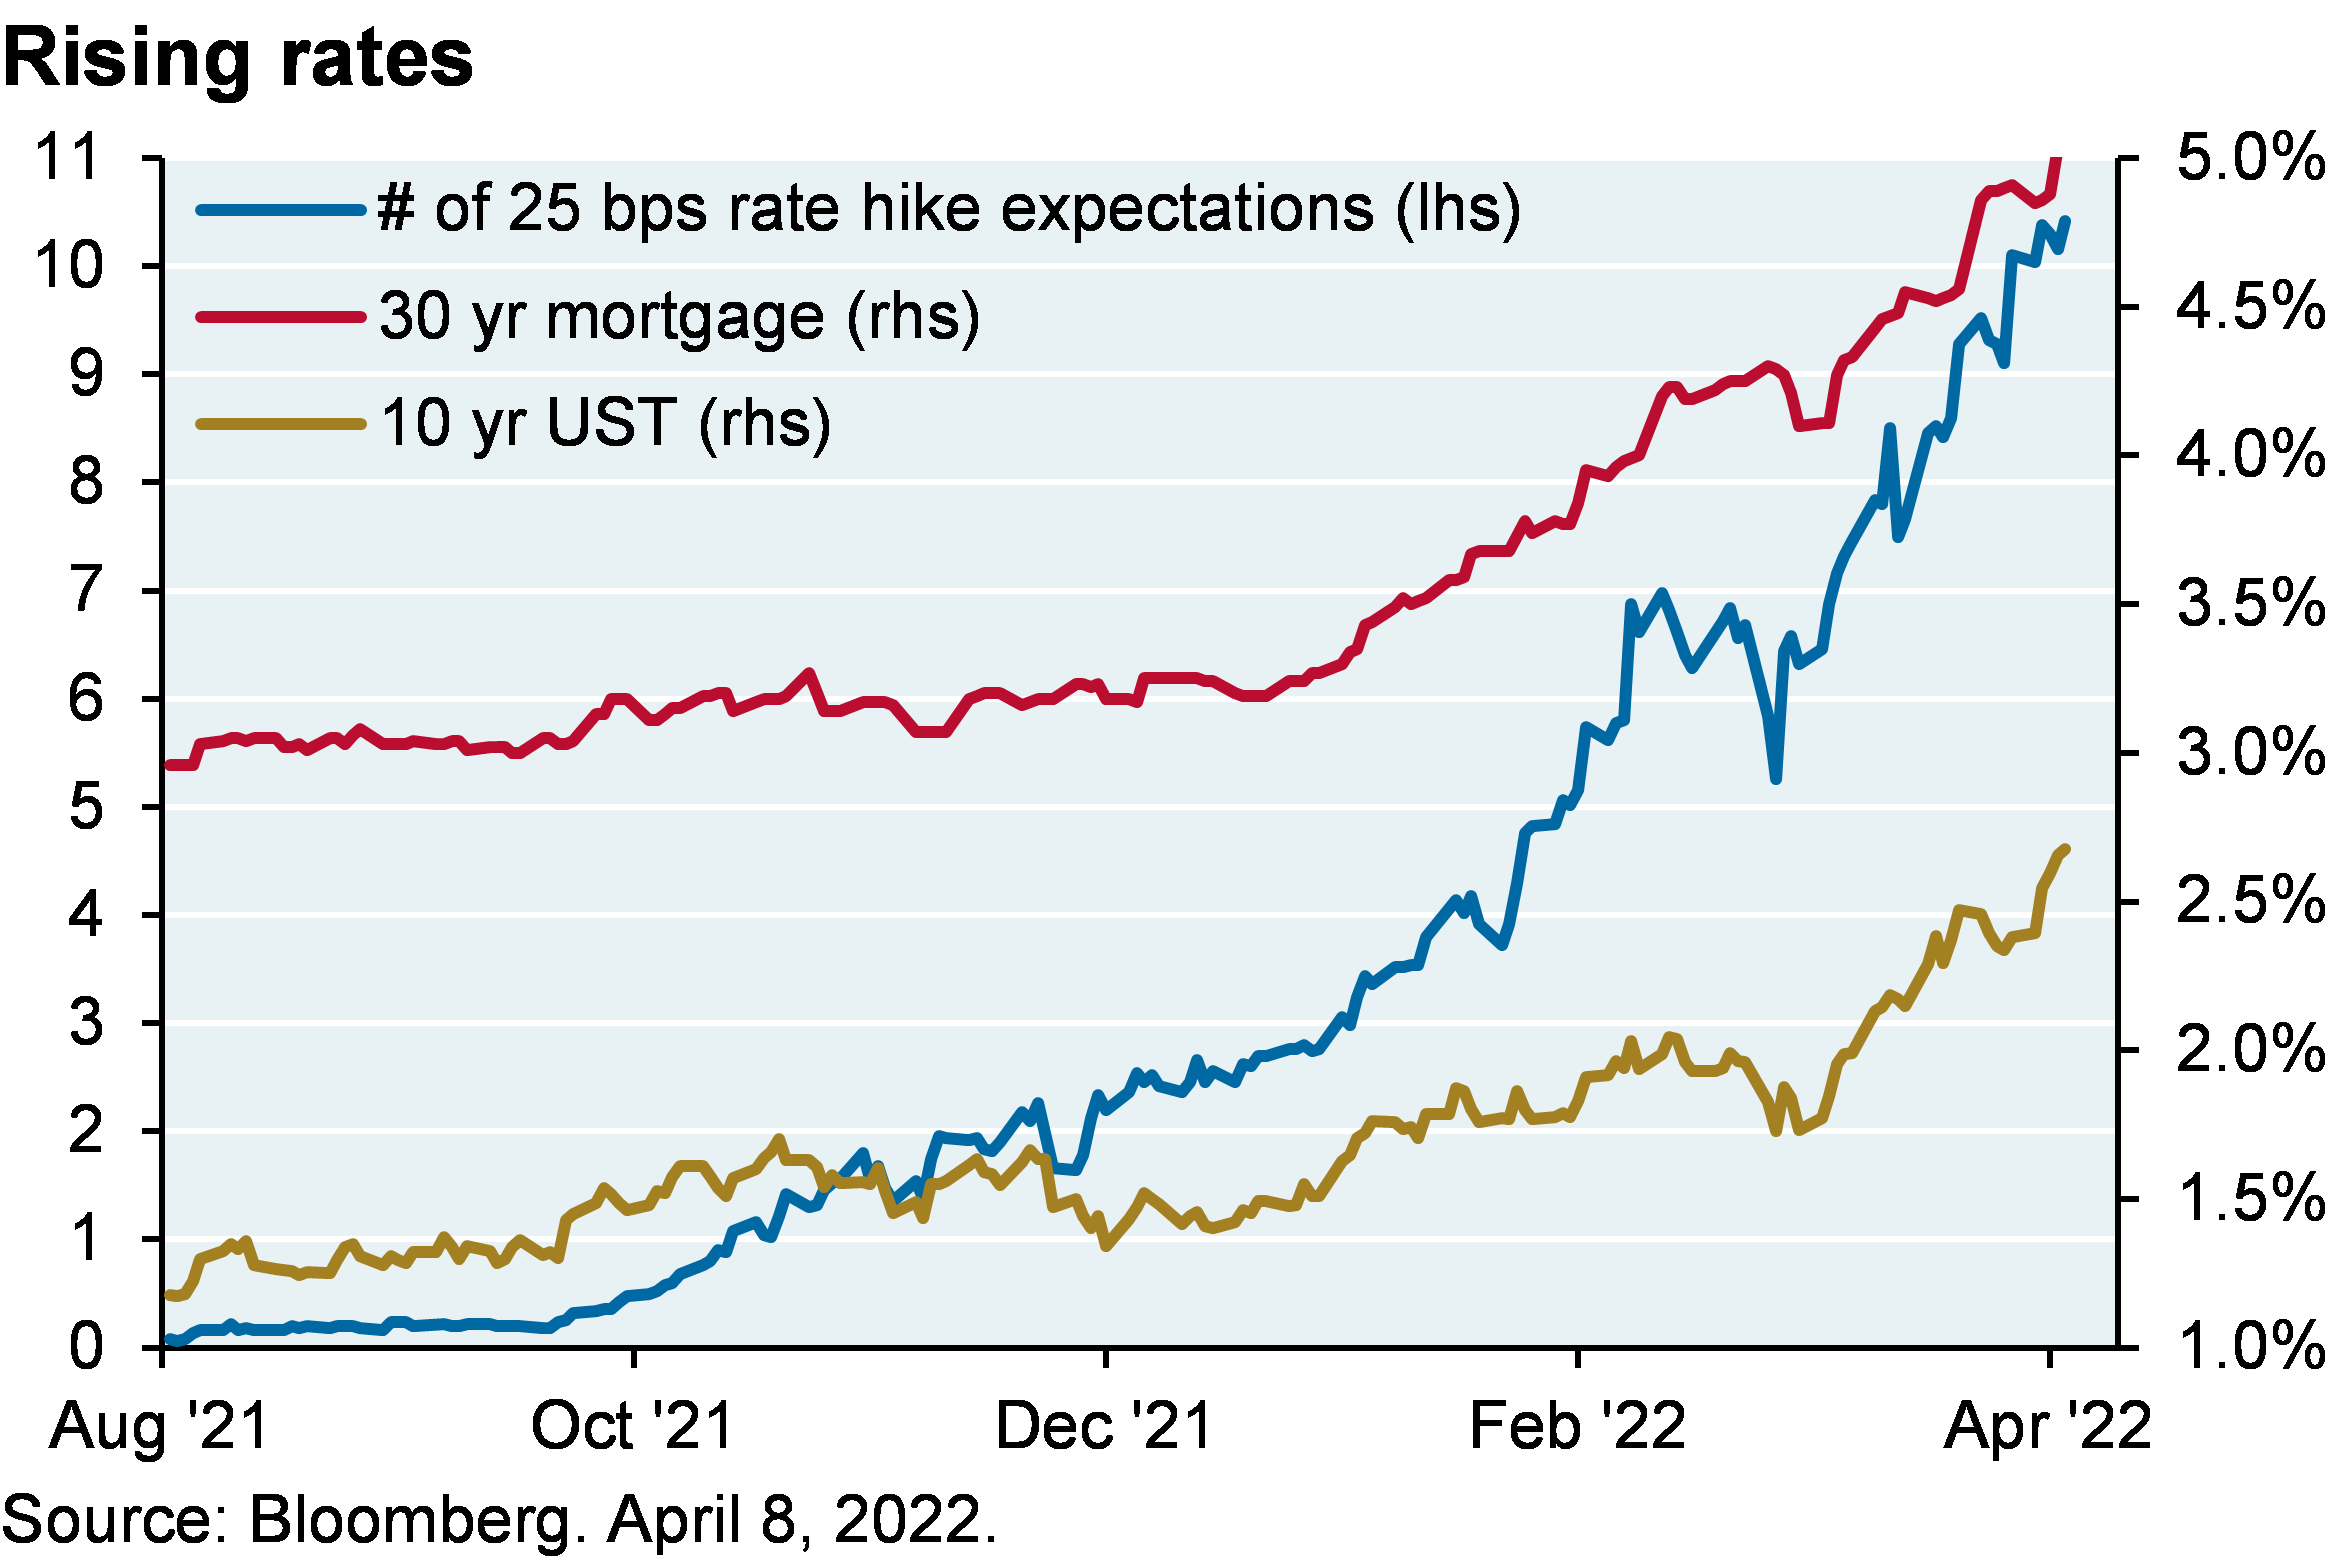 Line chart shows the number of 25 basis point rate hike expectations, 30 year mortgage rates, and 10 year US Treasury rates from August 2021 to now. Rates have risen substantially, with mortgage rates close to 5% and 10 year Treasury rates near 2.5%. As a result, the market is expecting over 9 hikes in the next 12 months.